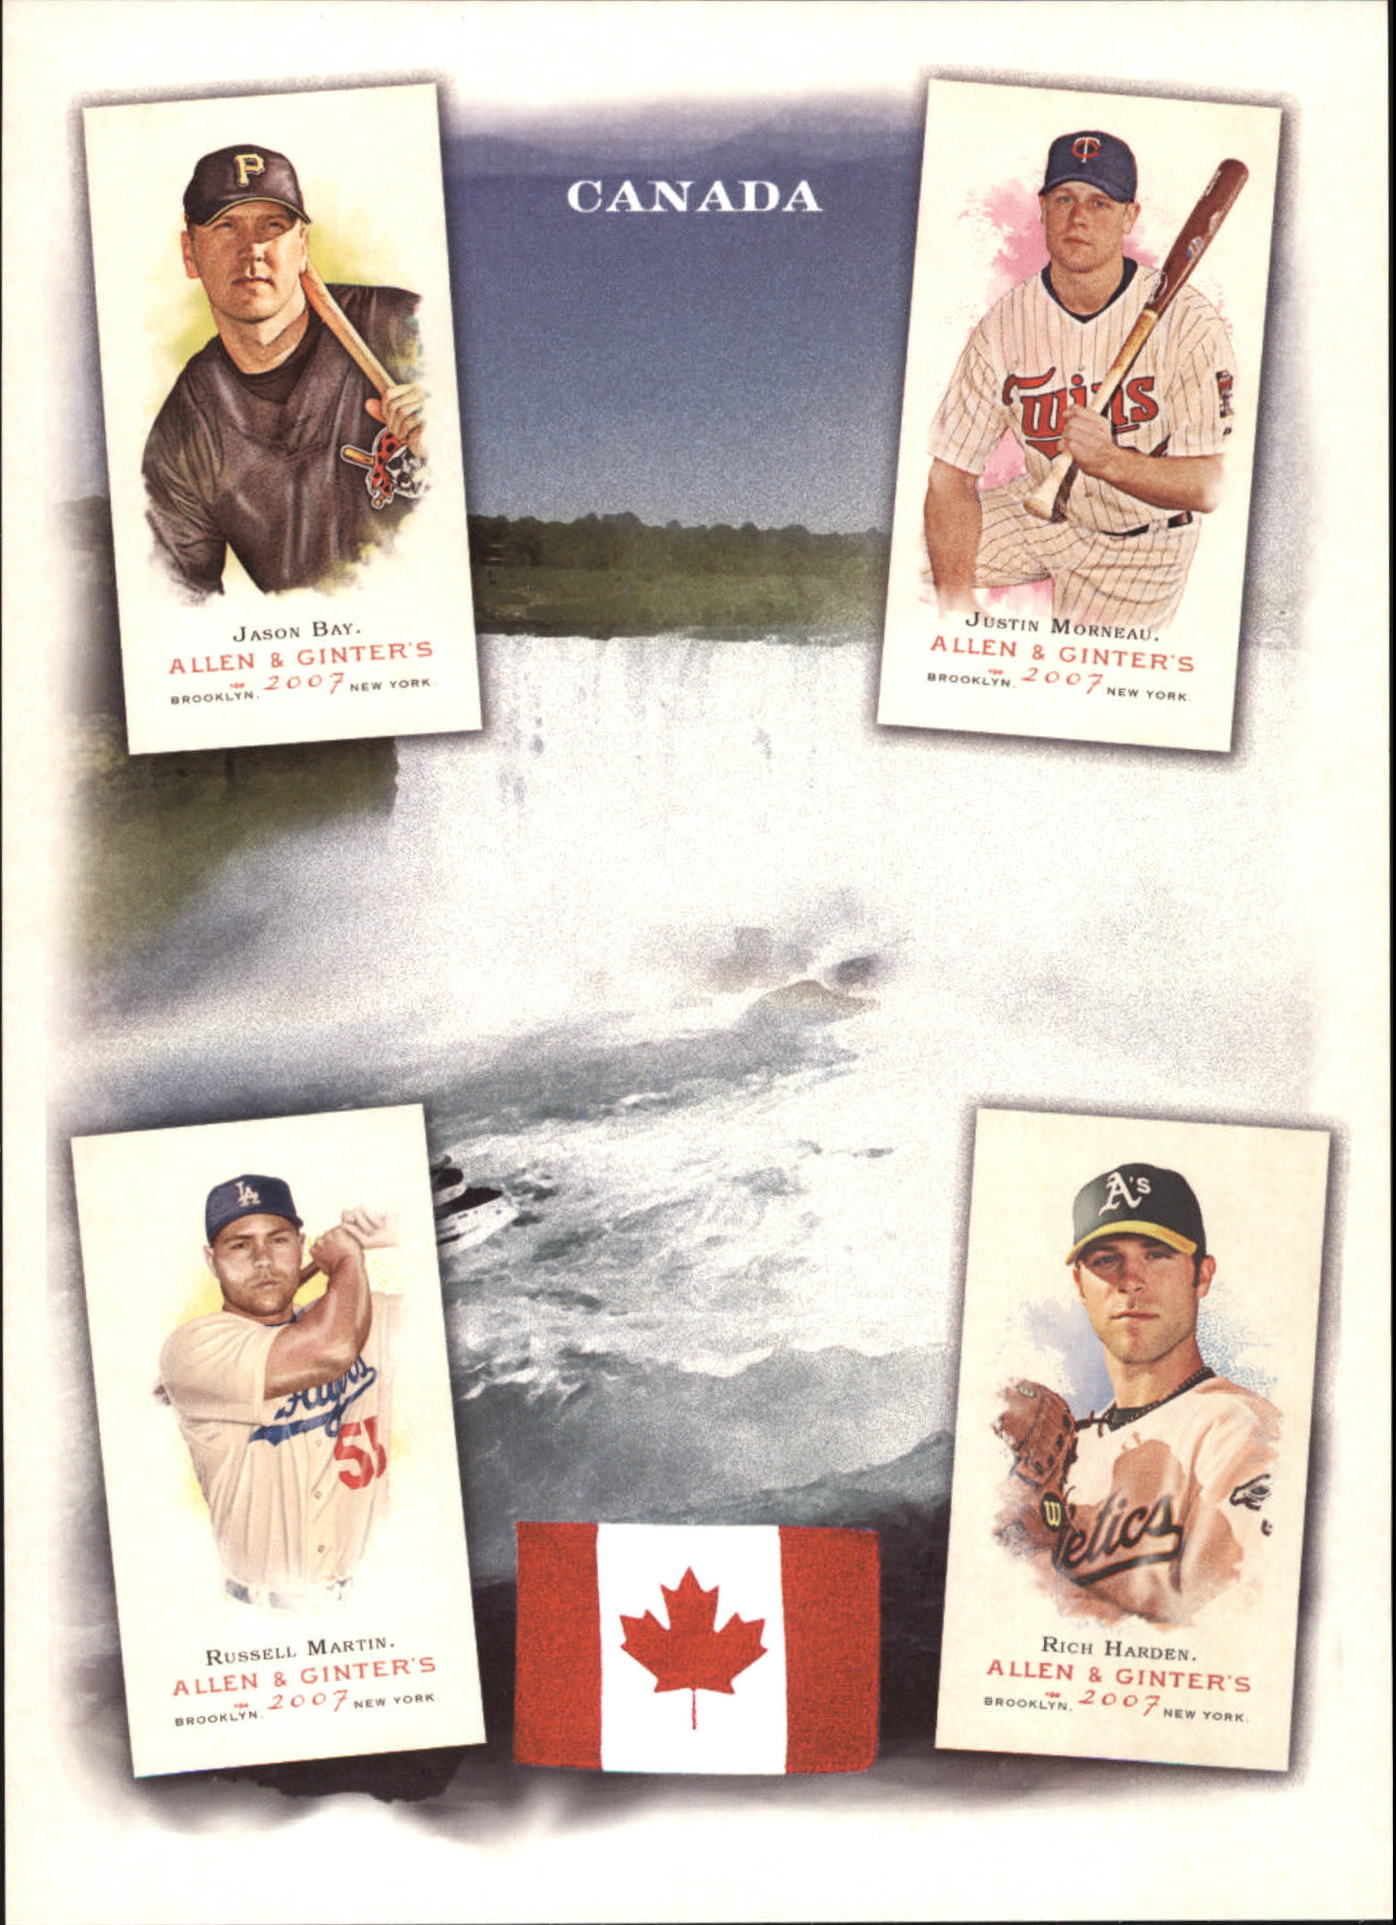 2007 Topps Allen and Ginter National Pride #5 Jason Bay/Russell Martin/Justin Morneau/Rich Harden